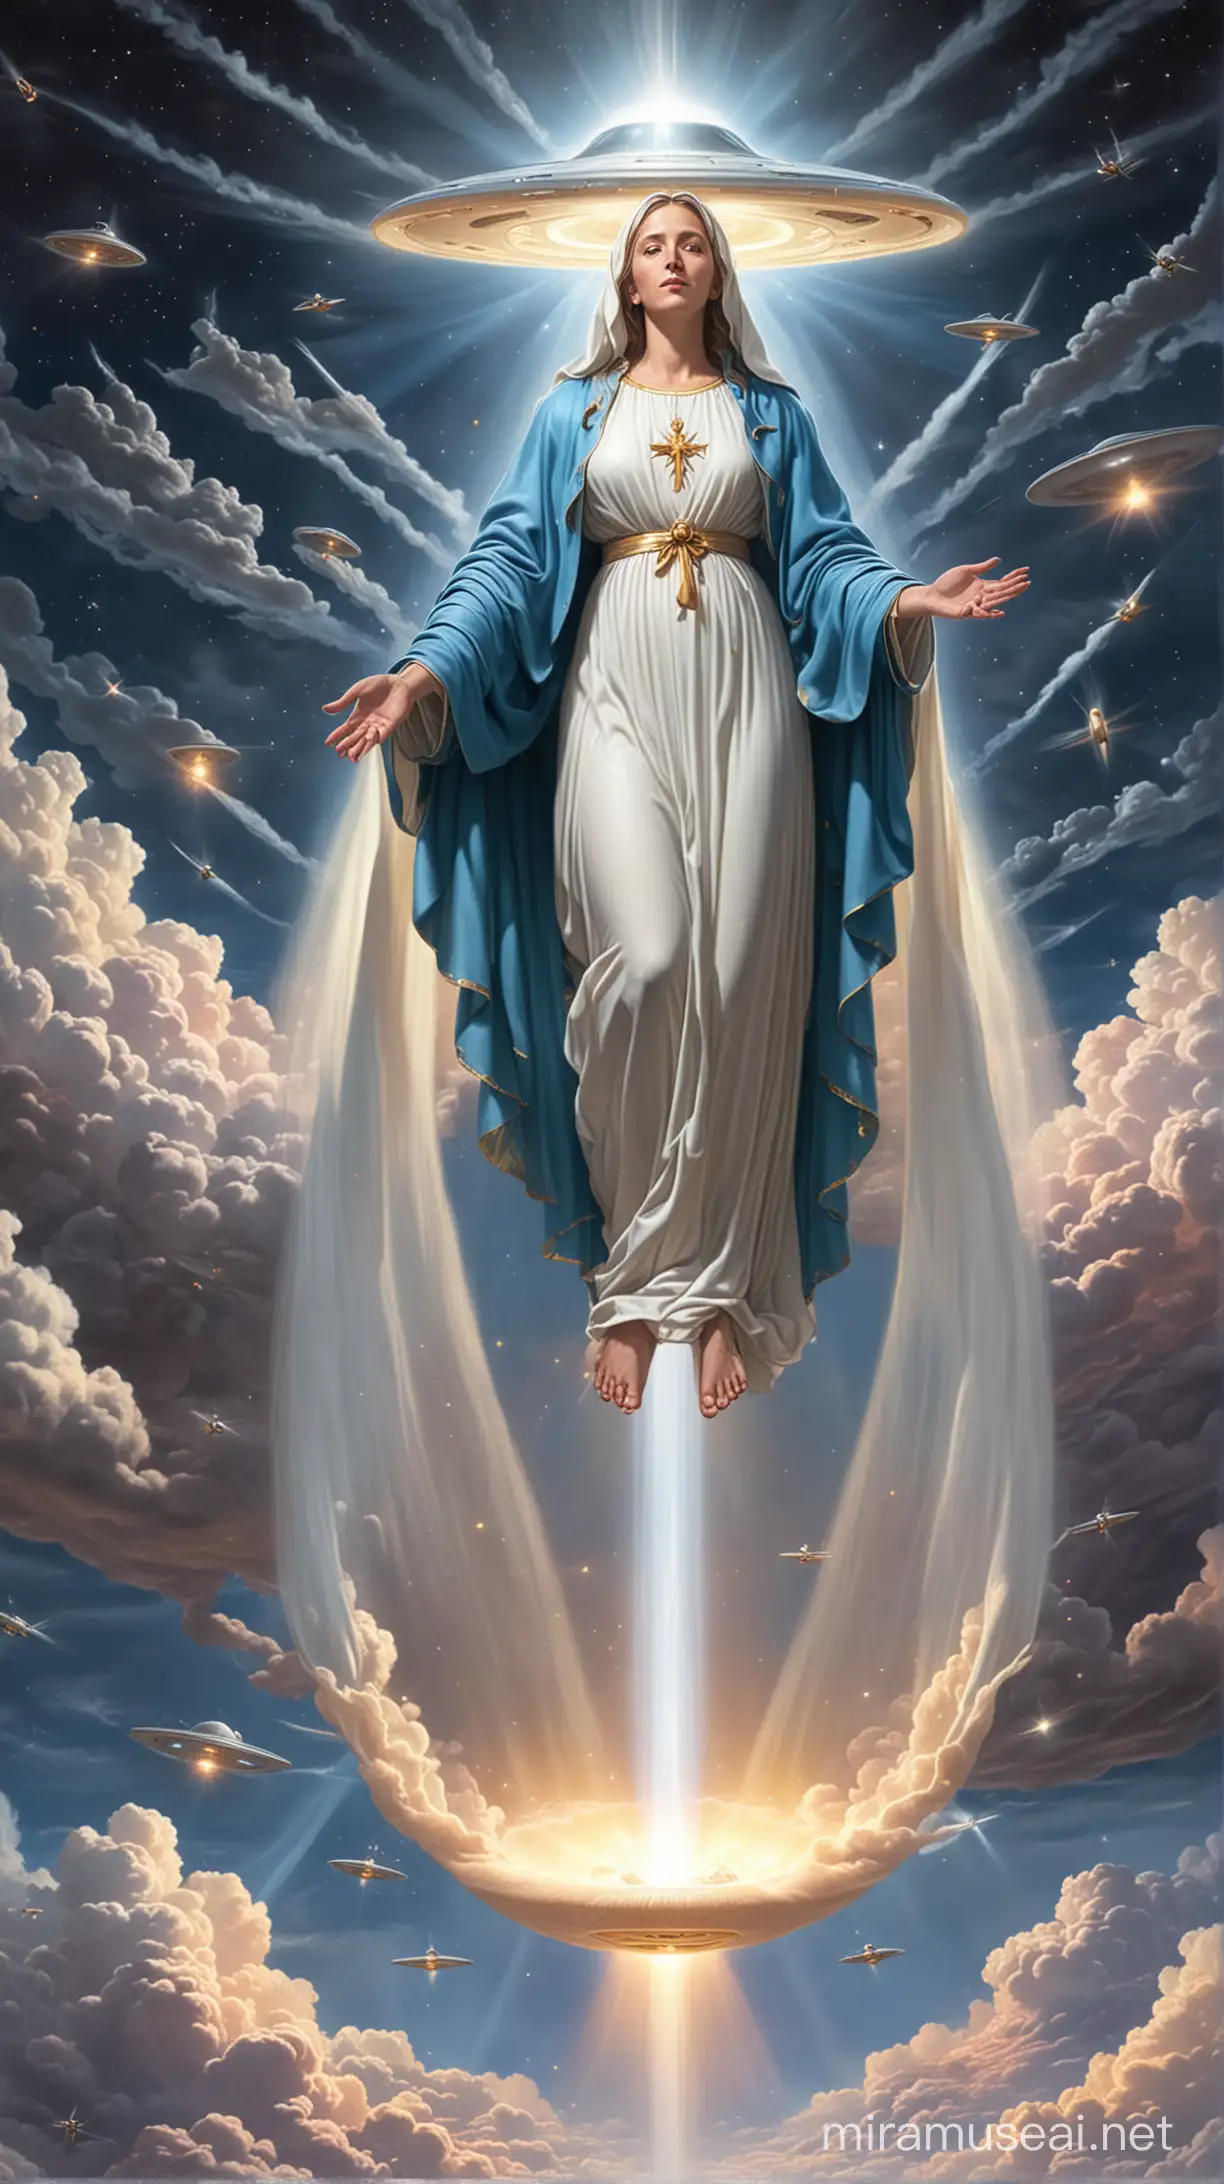 Virgin Mary Surrounded by a UFO in a Celestial Encounter